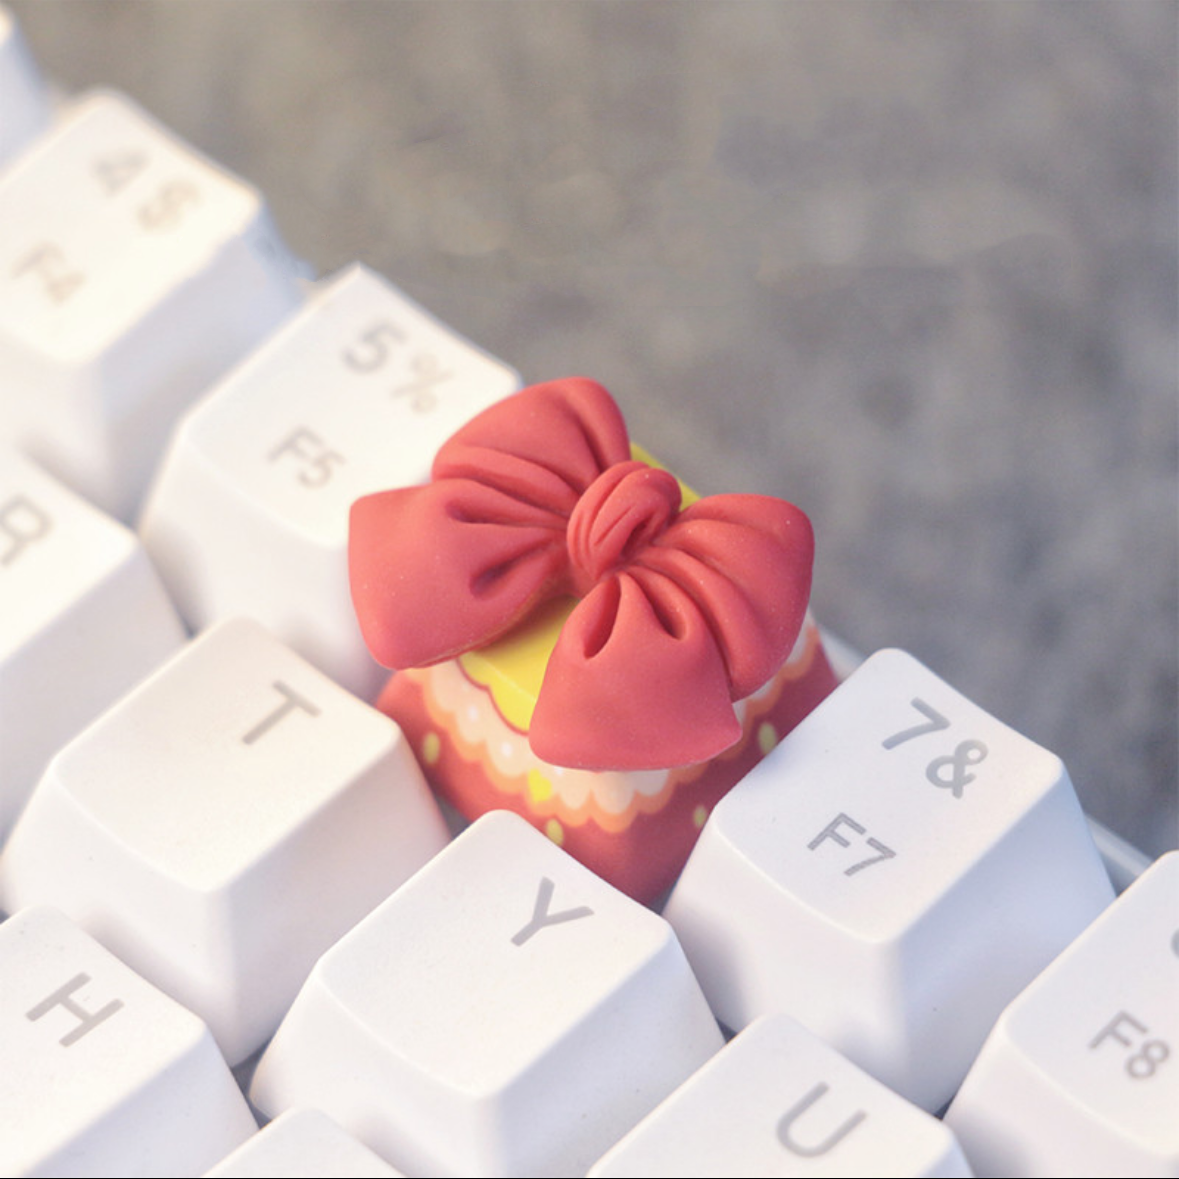 "Elevate your keyboard's style with our unique Bow Tie Custom Artisan Keycaps from AIHey Studio. Handcrafted with attention to detail, these keycaps are designed to add a touch of elegance to your setup. Each keycap features a bow tie design, making a fashion statement while you type. From AIHey Studio, known for the best artisan keycaps, these are the epitome of craftsmanship and style. Stand out from the crowd with these one-of-a-kind artisan keycaps." 🎩💻 #KeyboardAccessories #ArtisanKeycaps #BowTieDesign